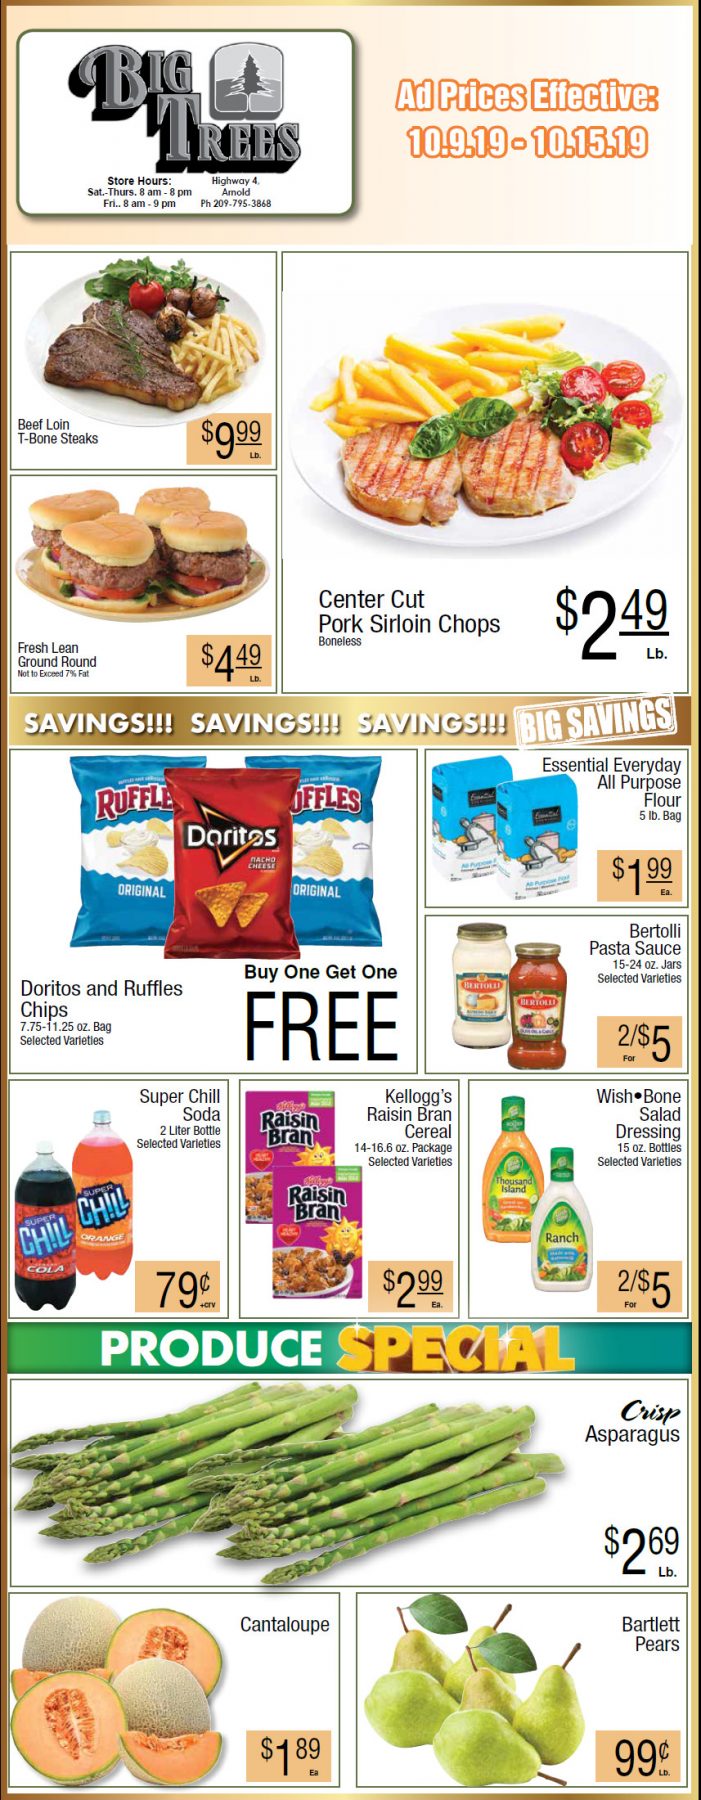 Big Trees Market Weekly Ad & Grocery Specials Through October 15th